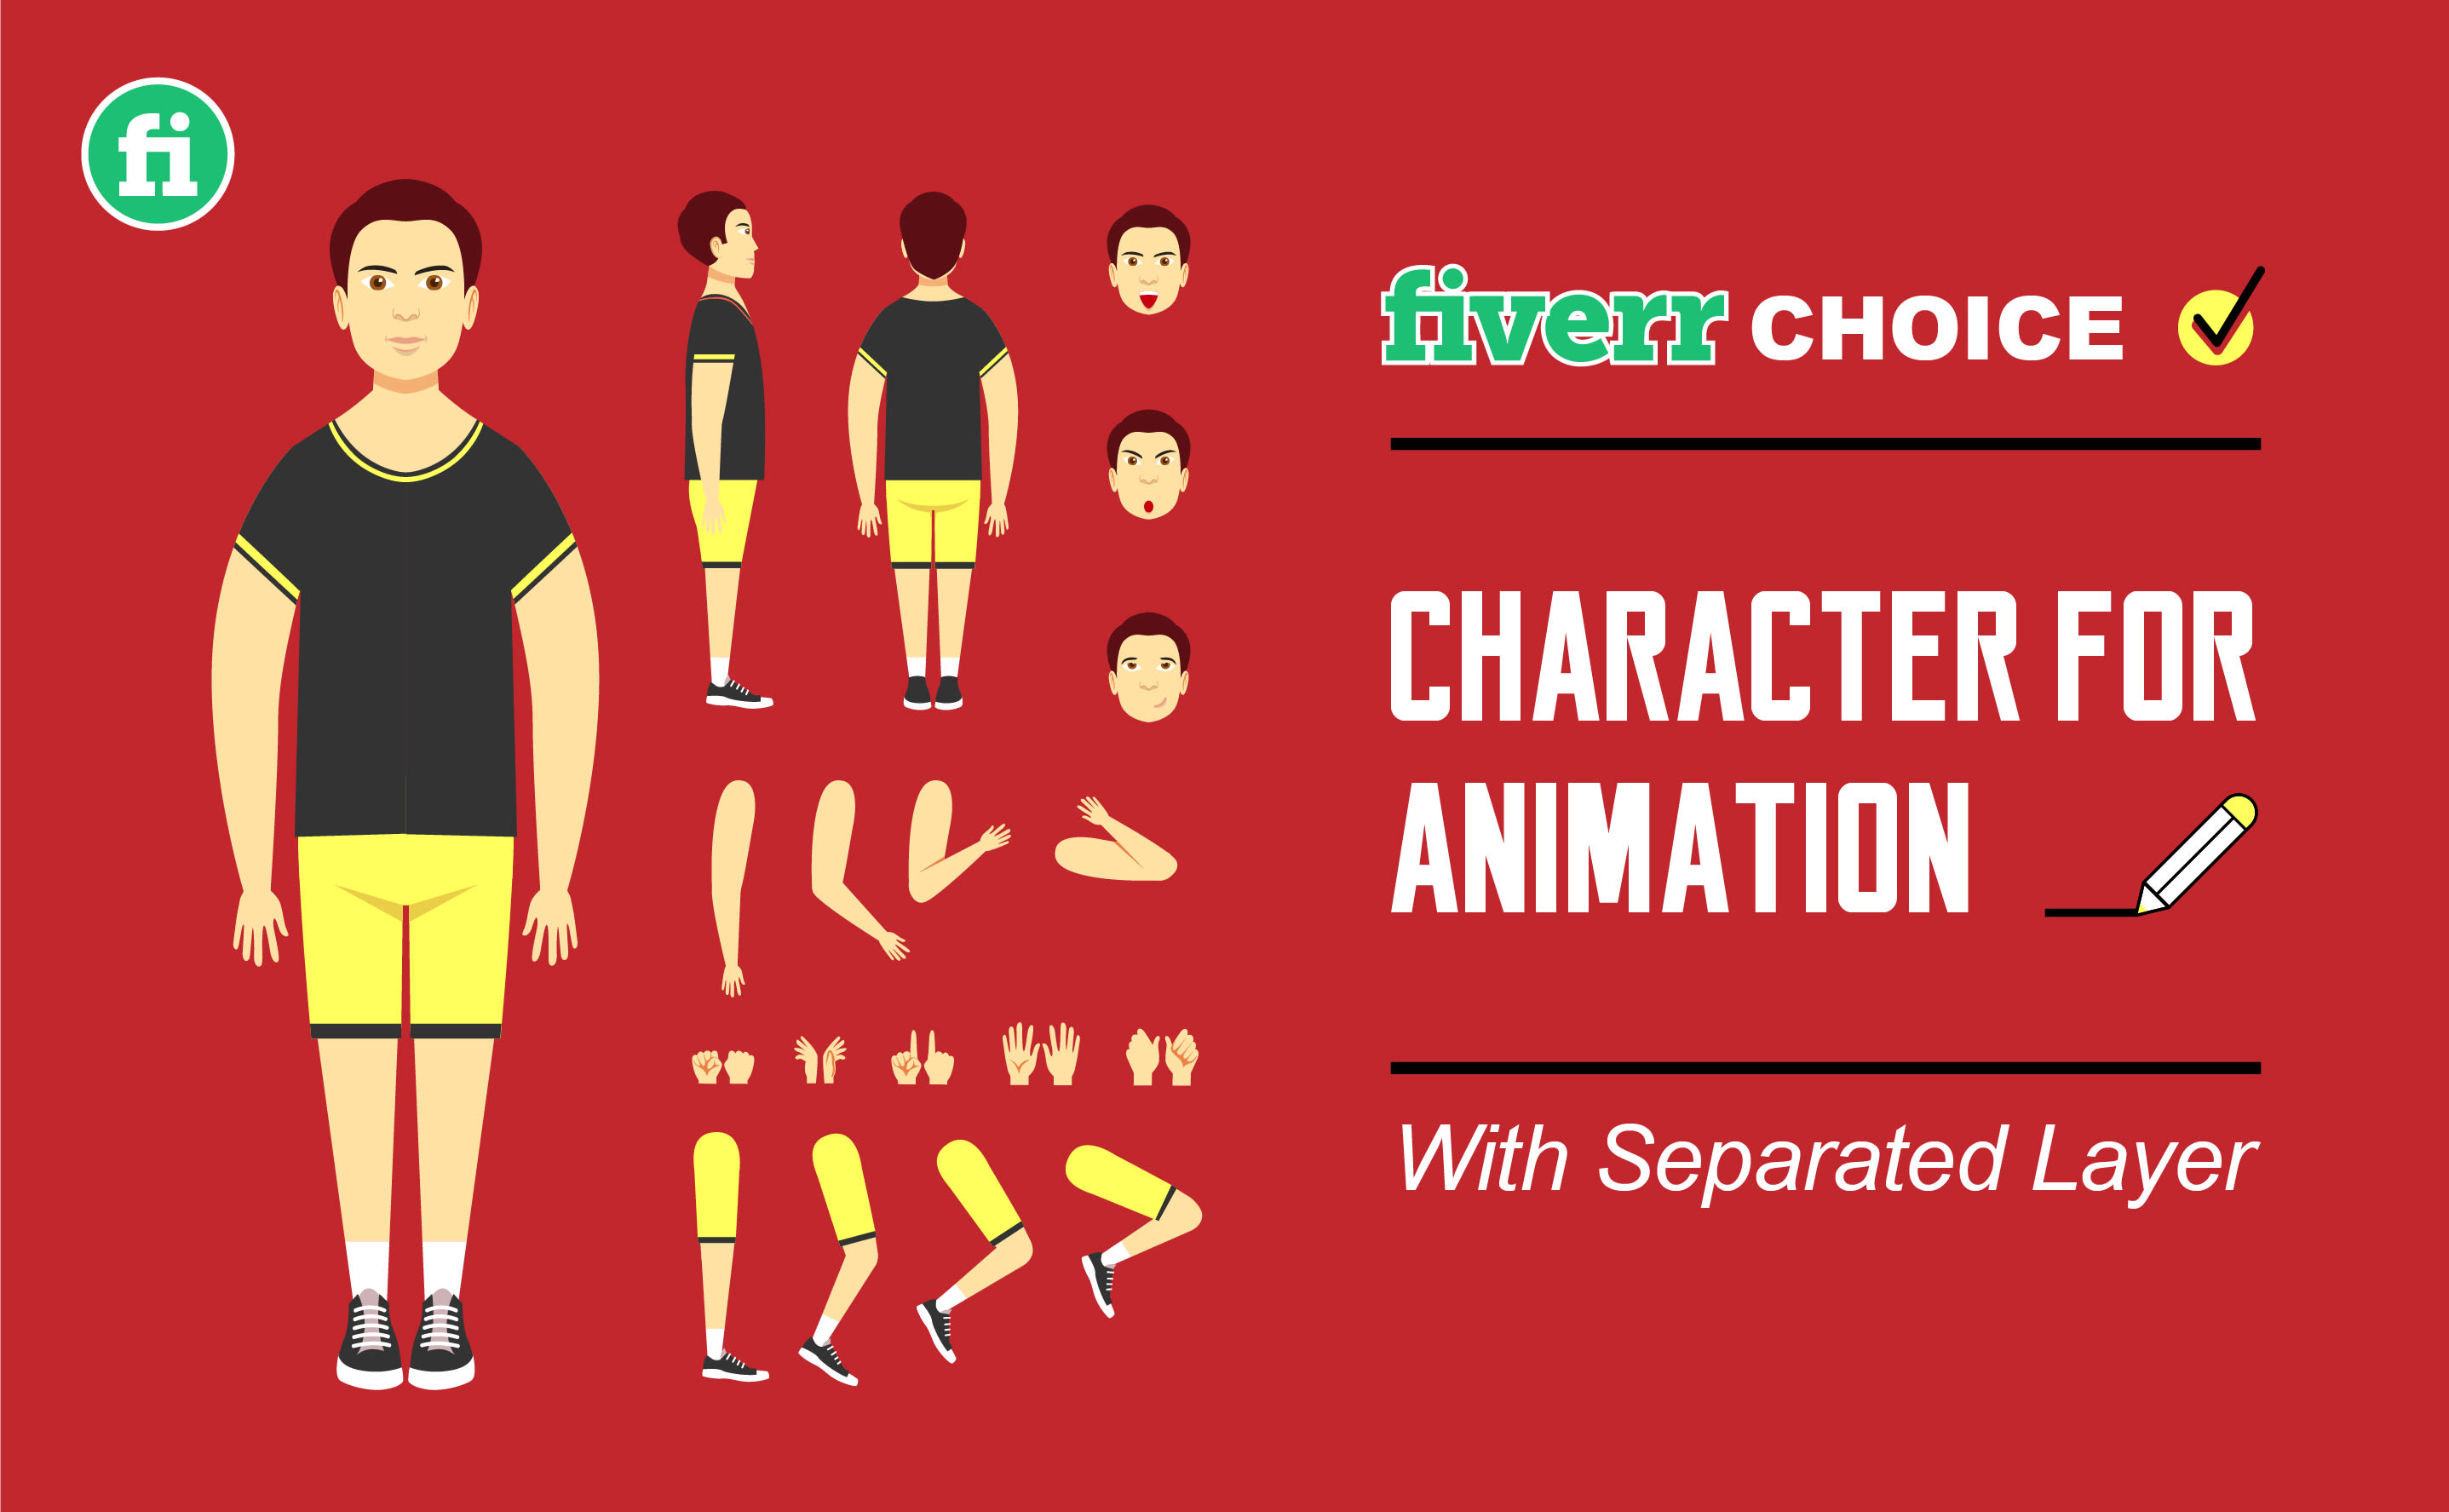 Design 2d character for animation with separated layers by Artvelation |  Fiverr